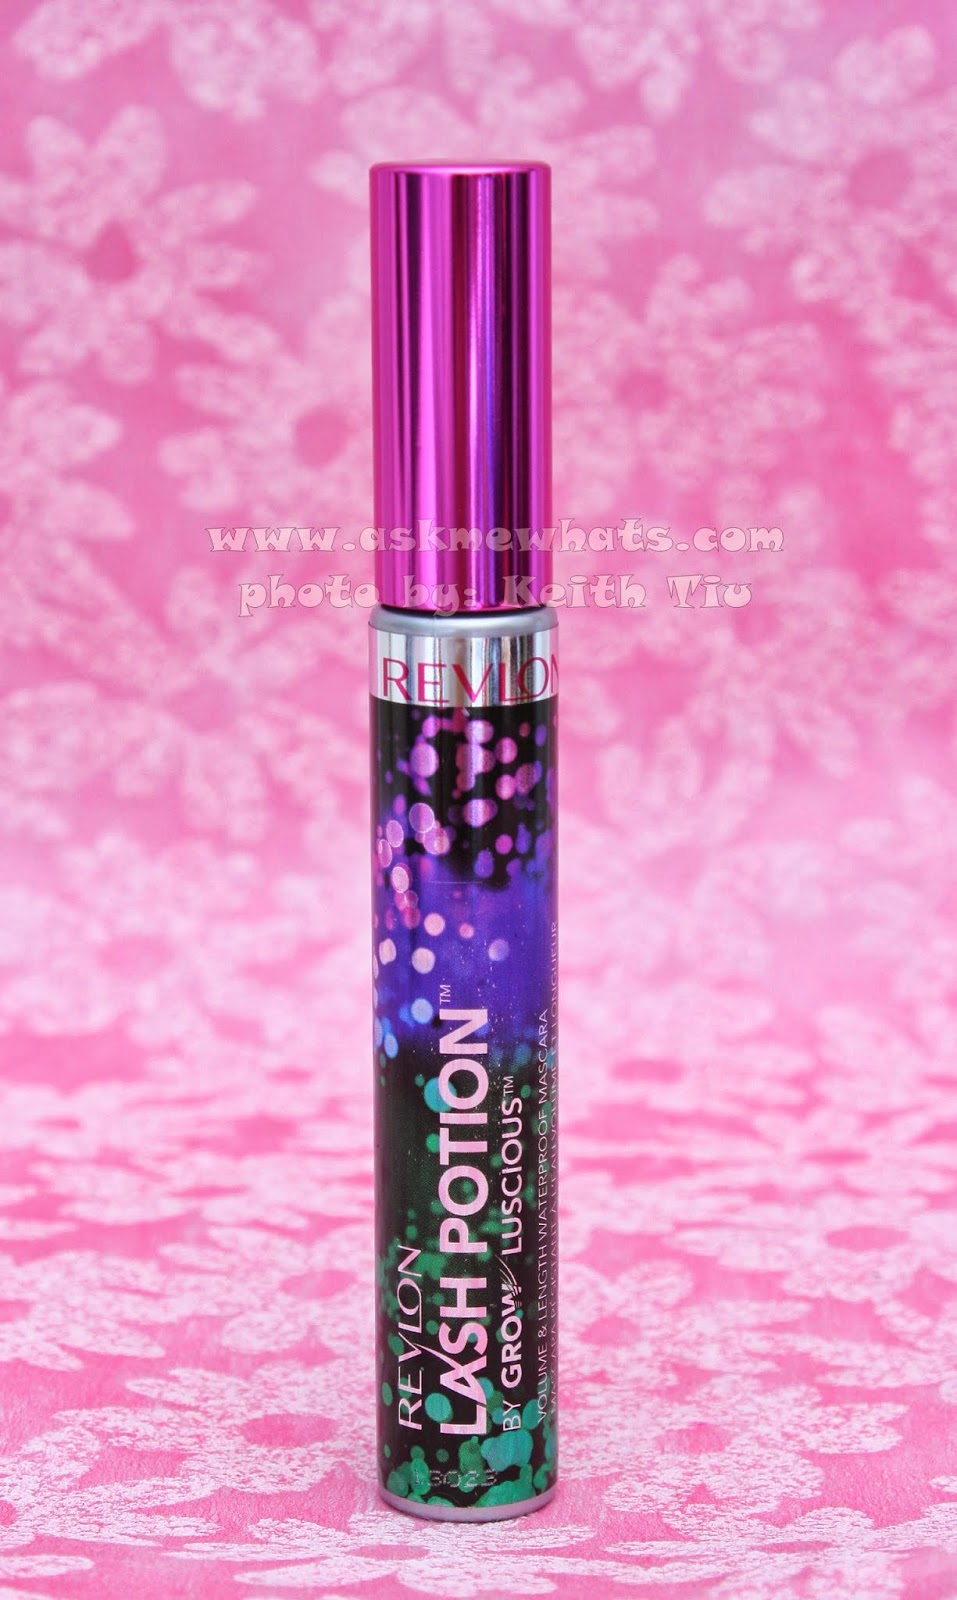 Askmewhats: Lash Potion By Grow Waterproof Volume Mascara Review